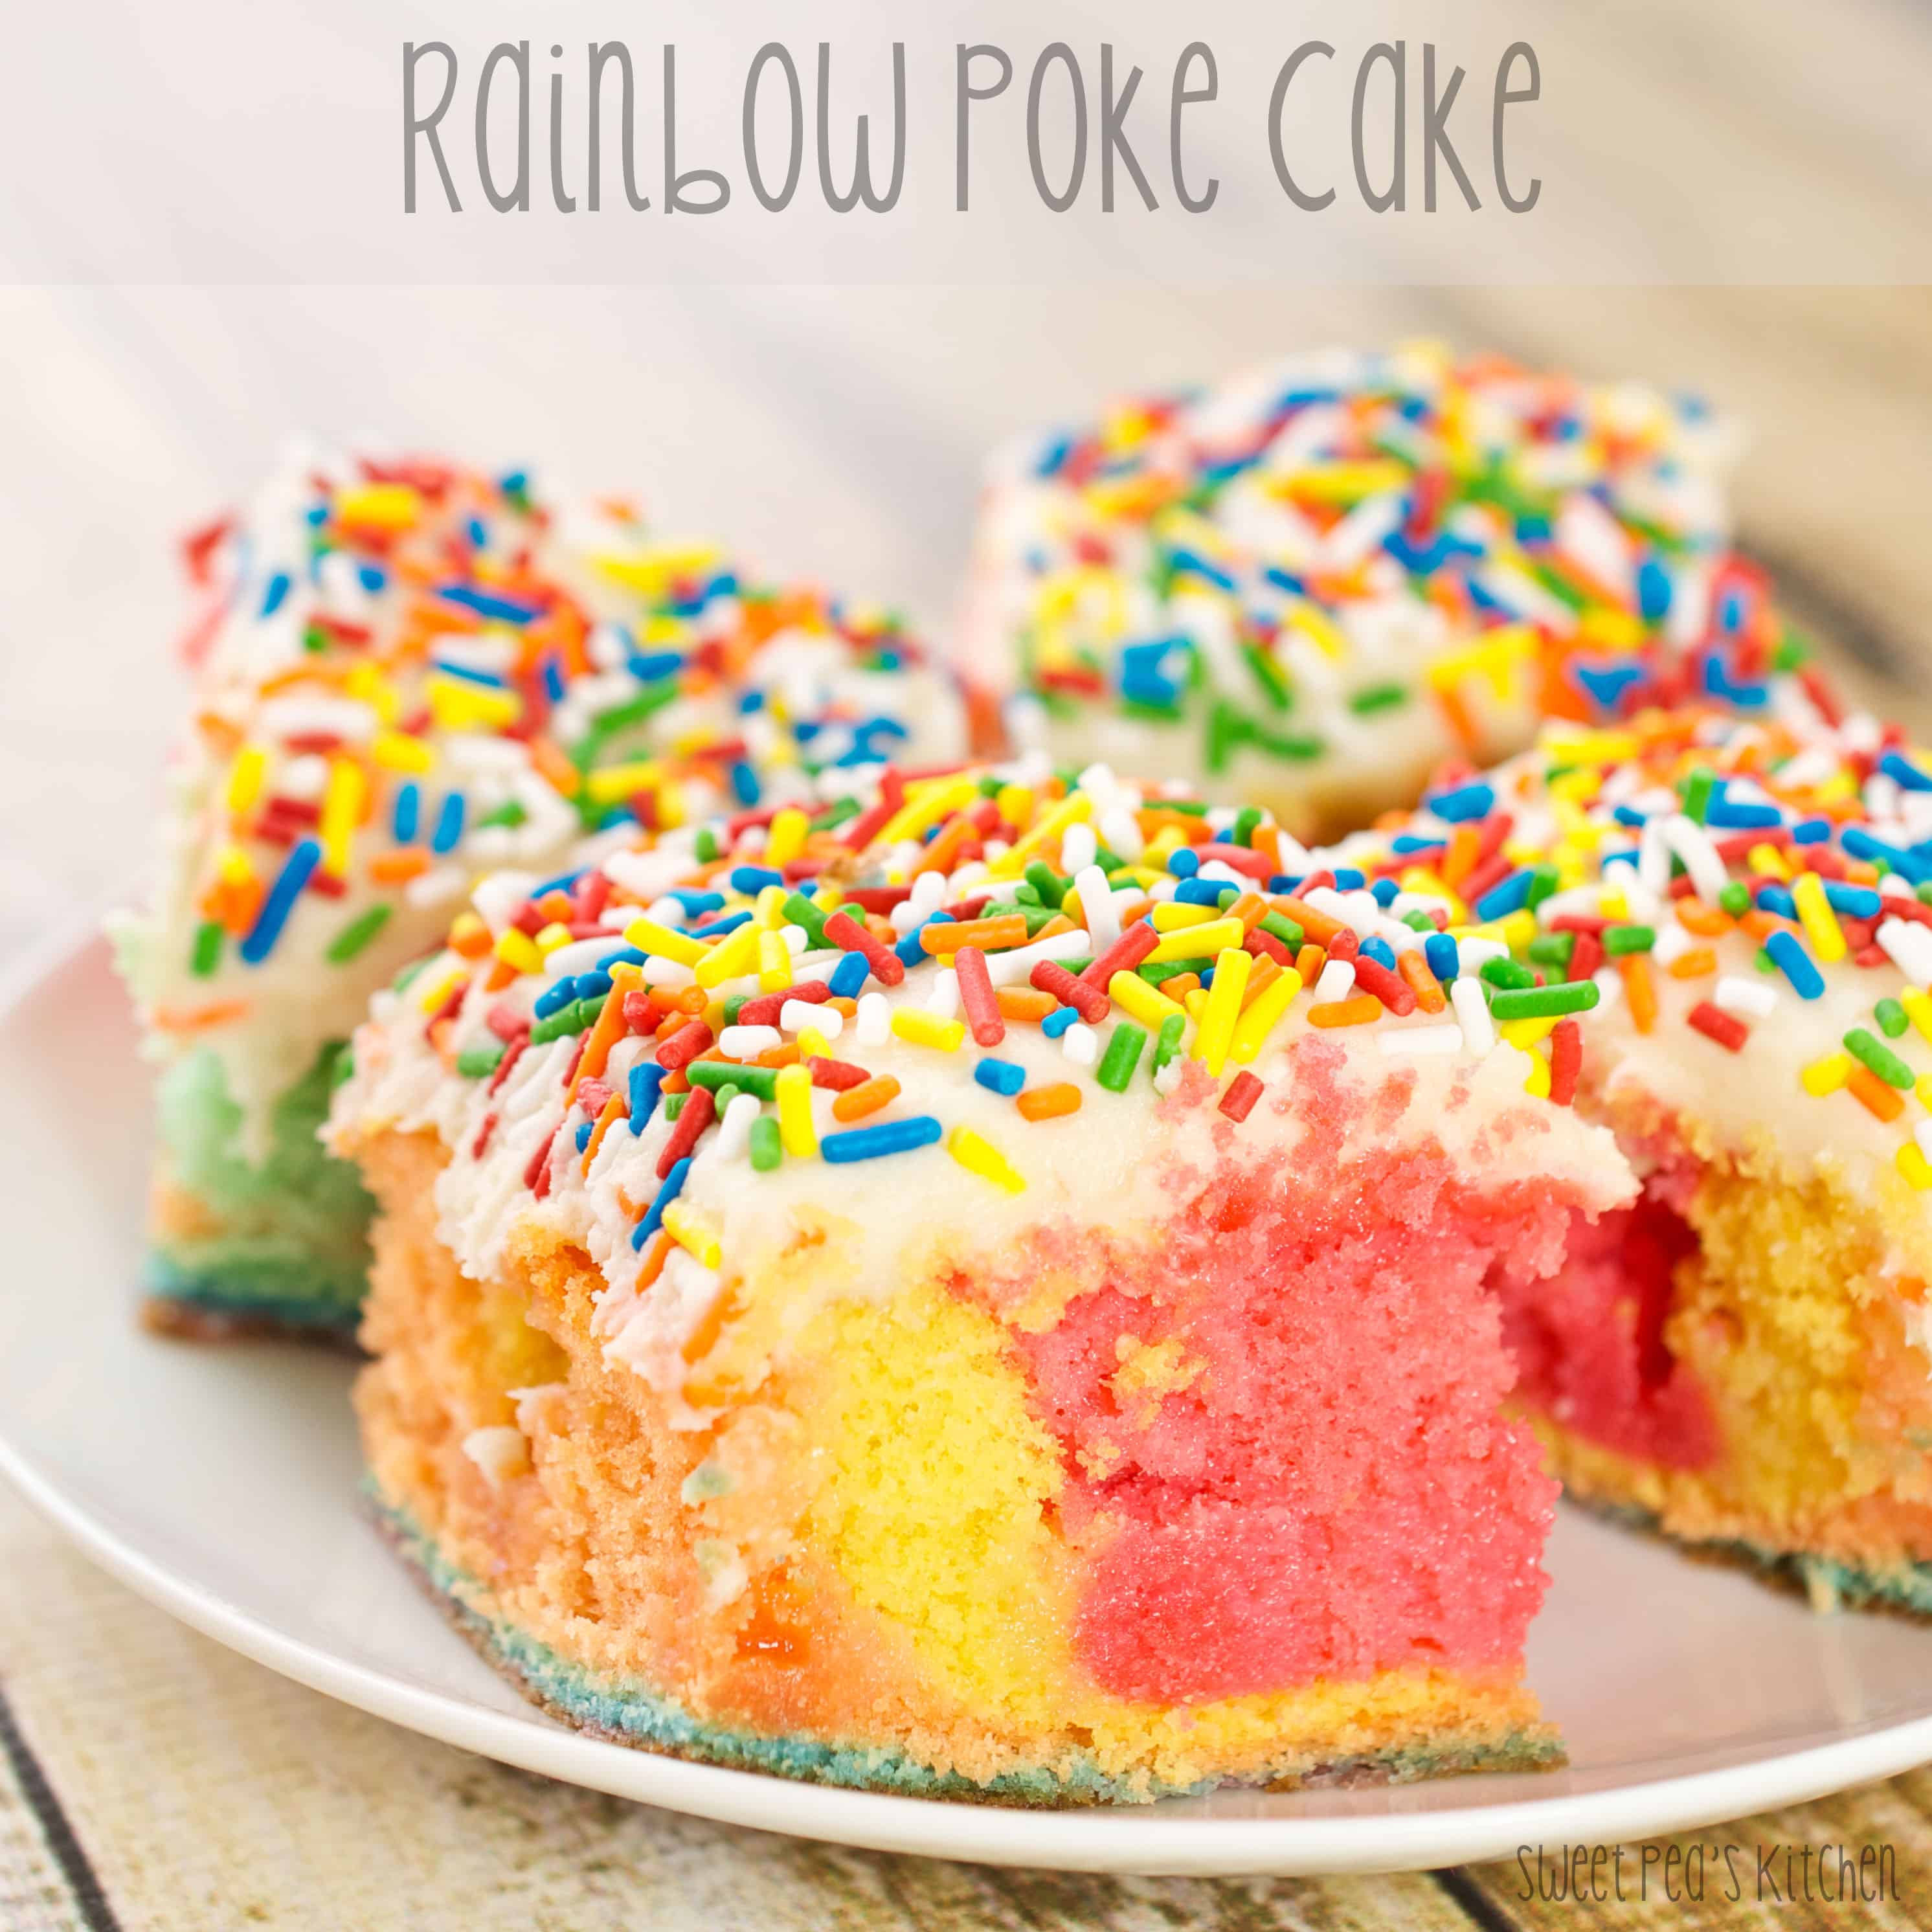 several pieces of poke cake on platter